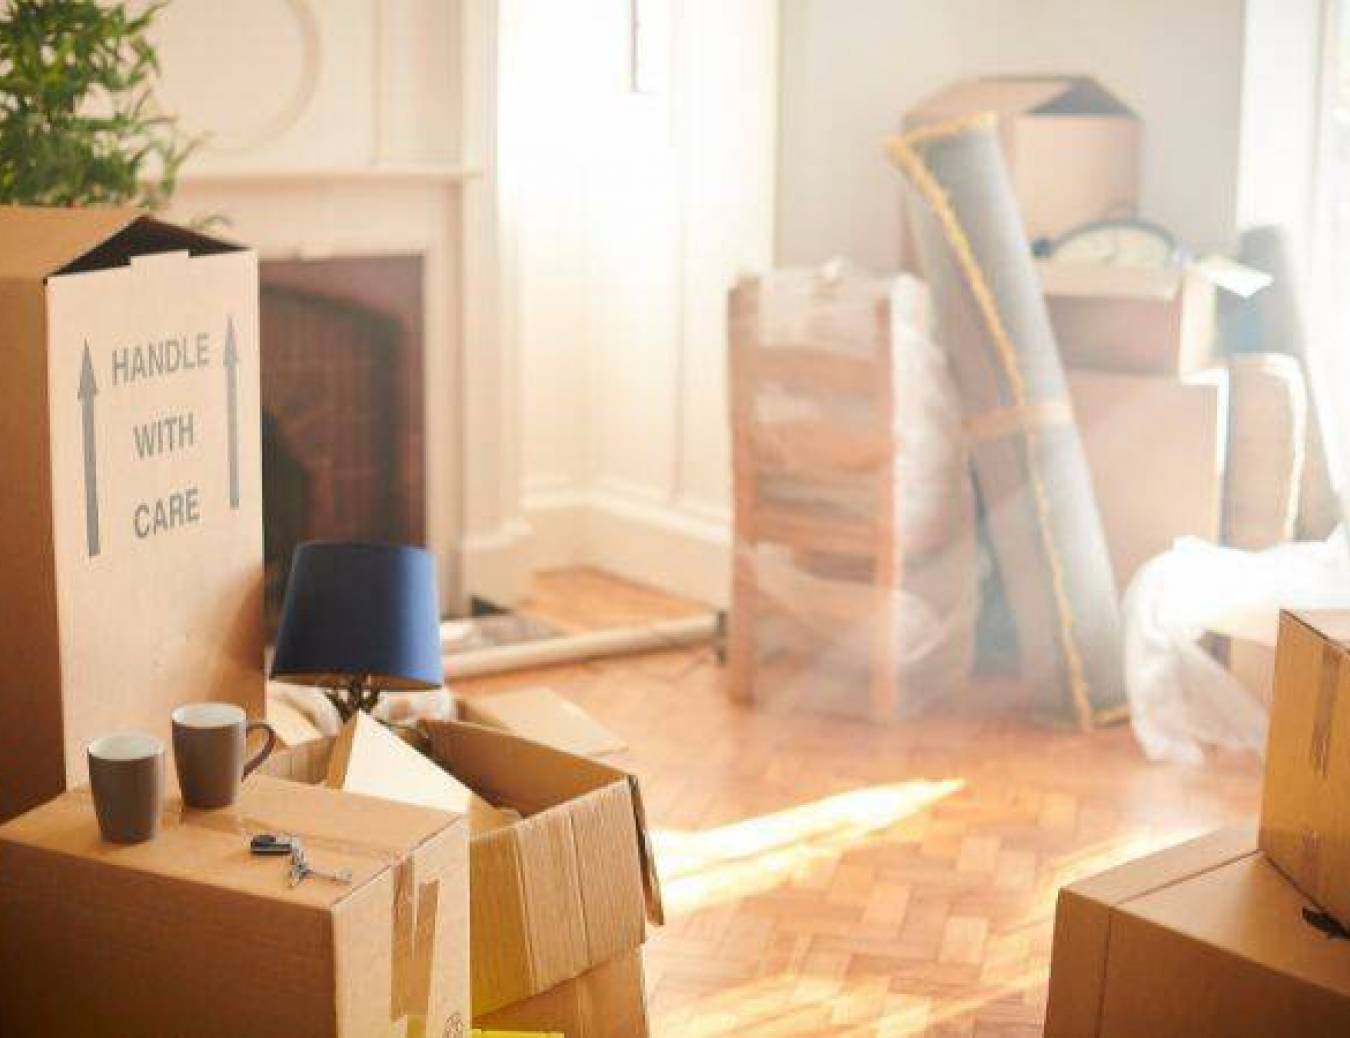 Professional house clearance services for tenants: How they can help You get your deposit back